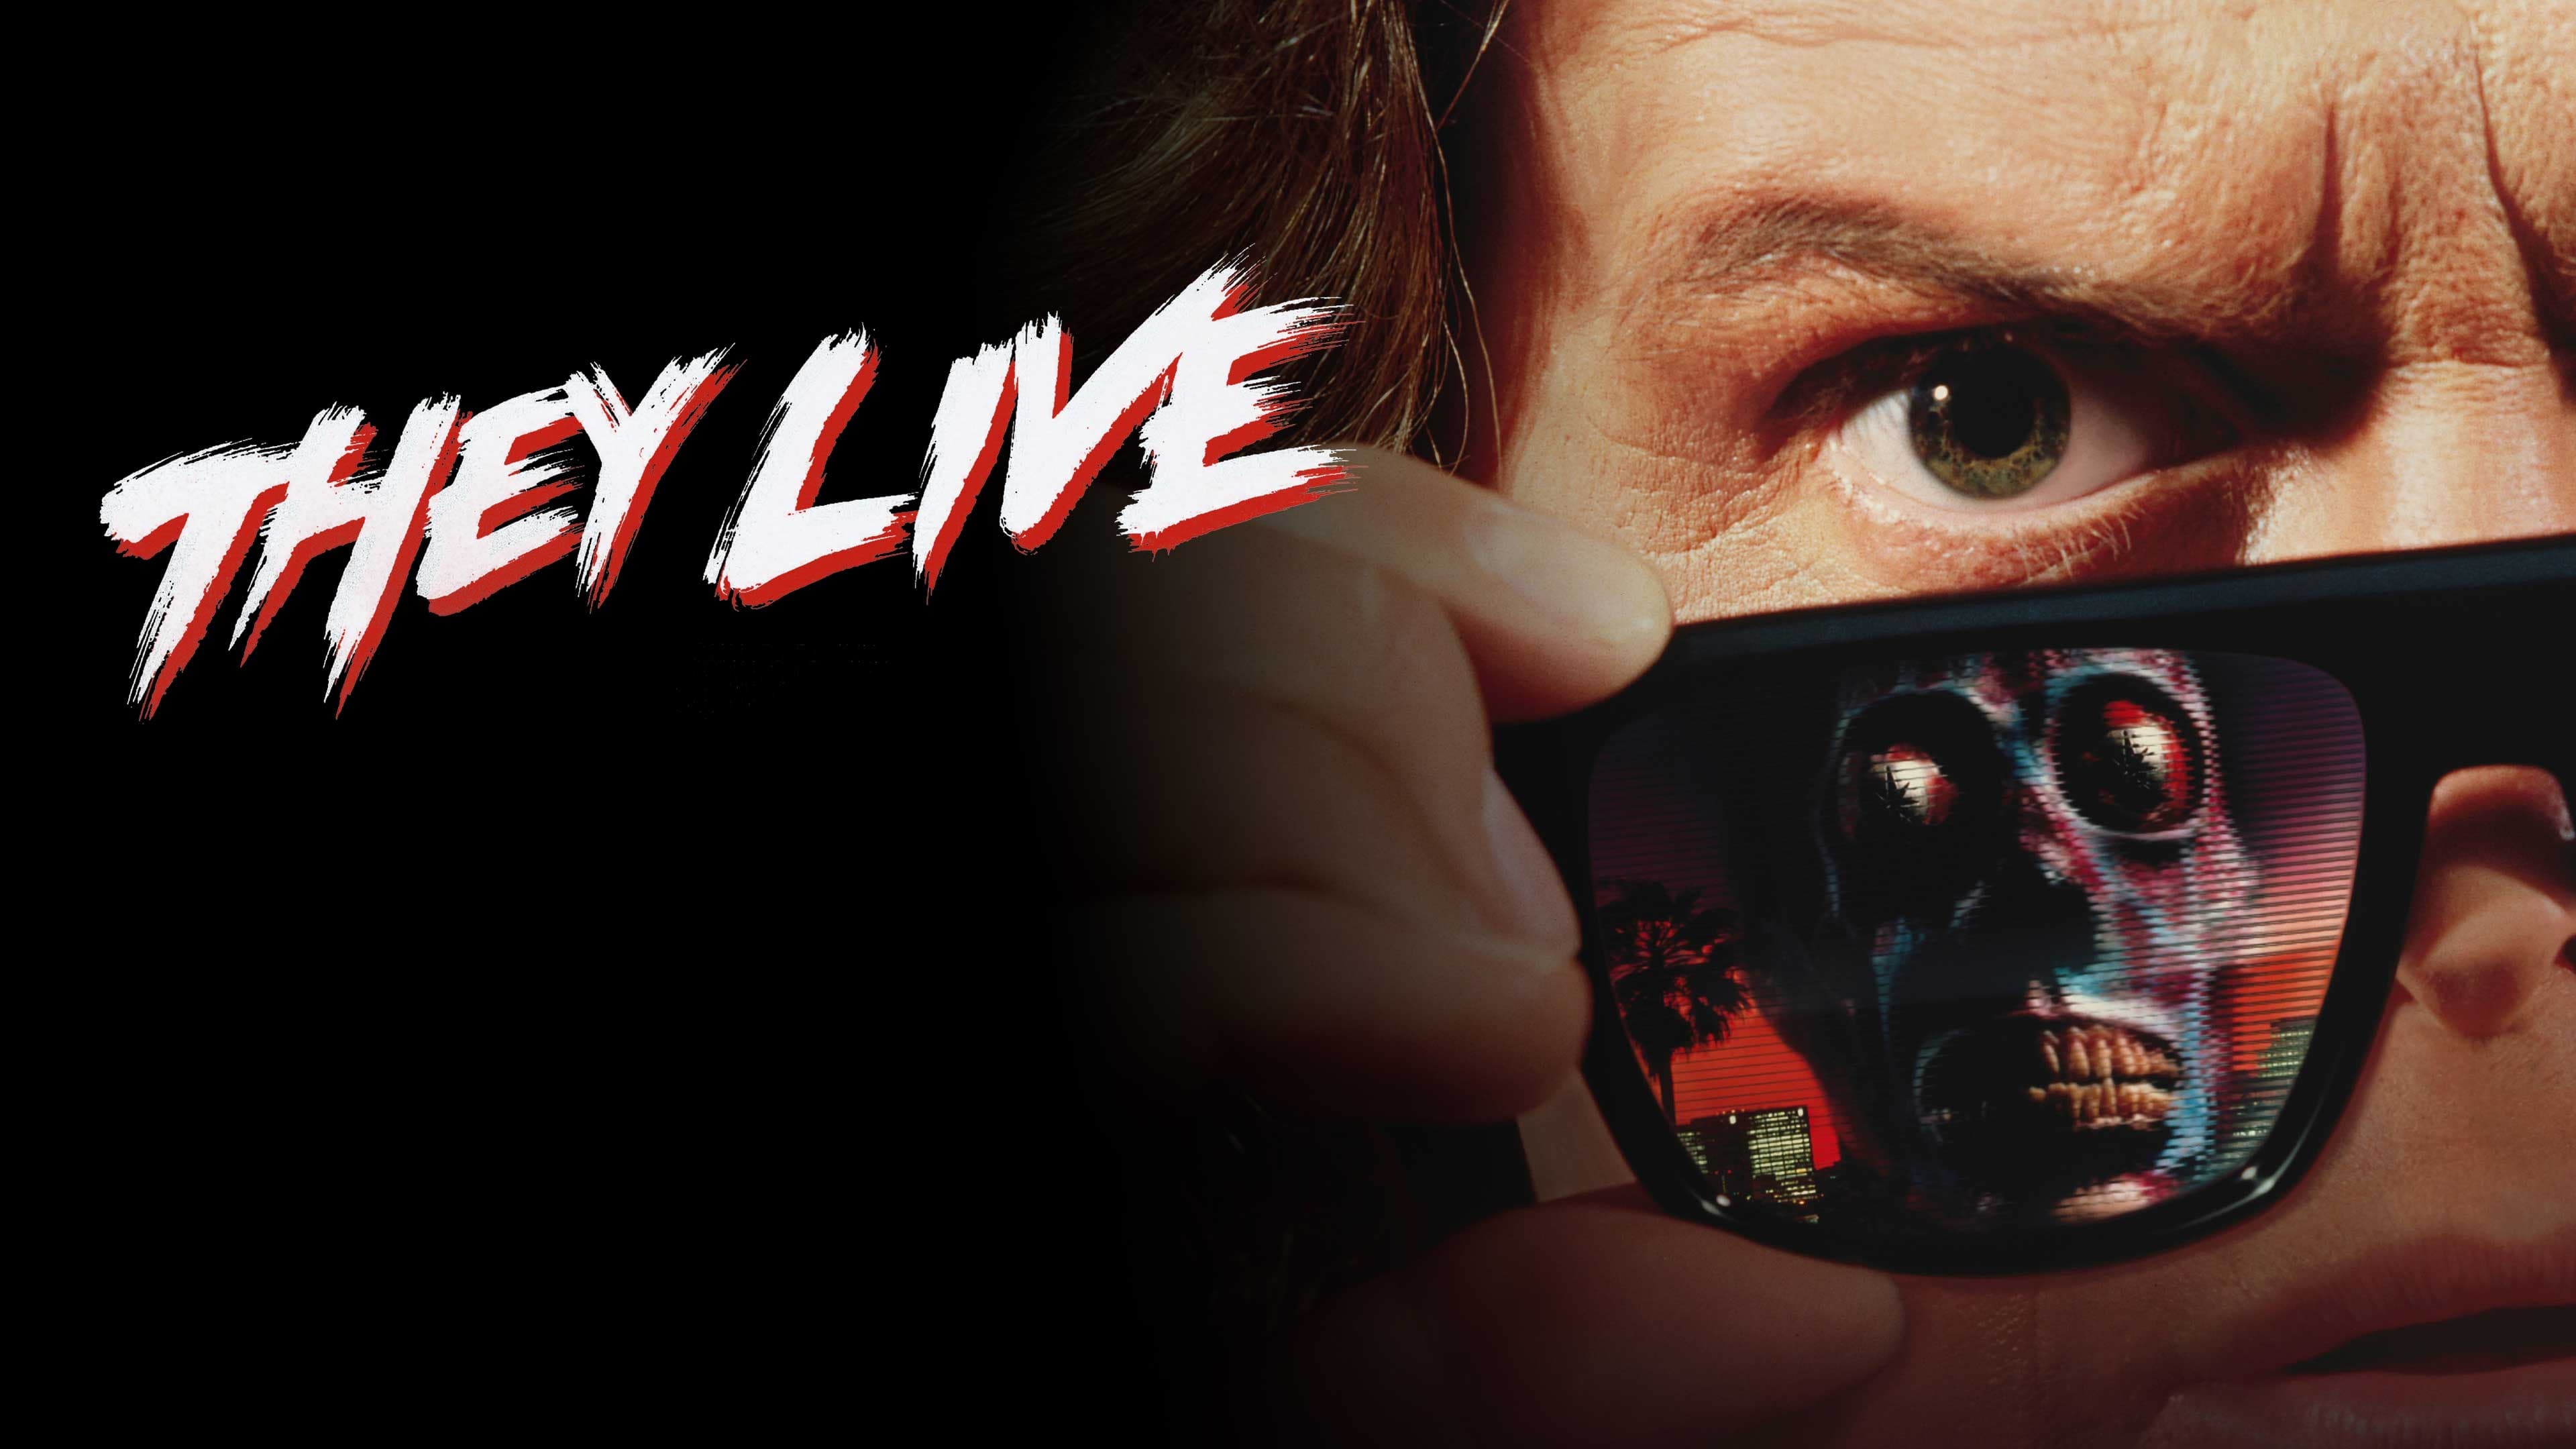 They Live (1988)